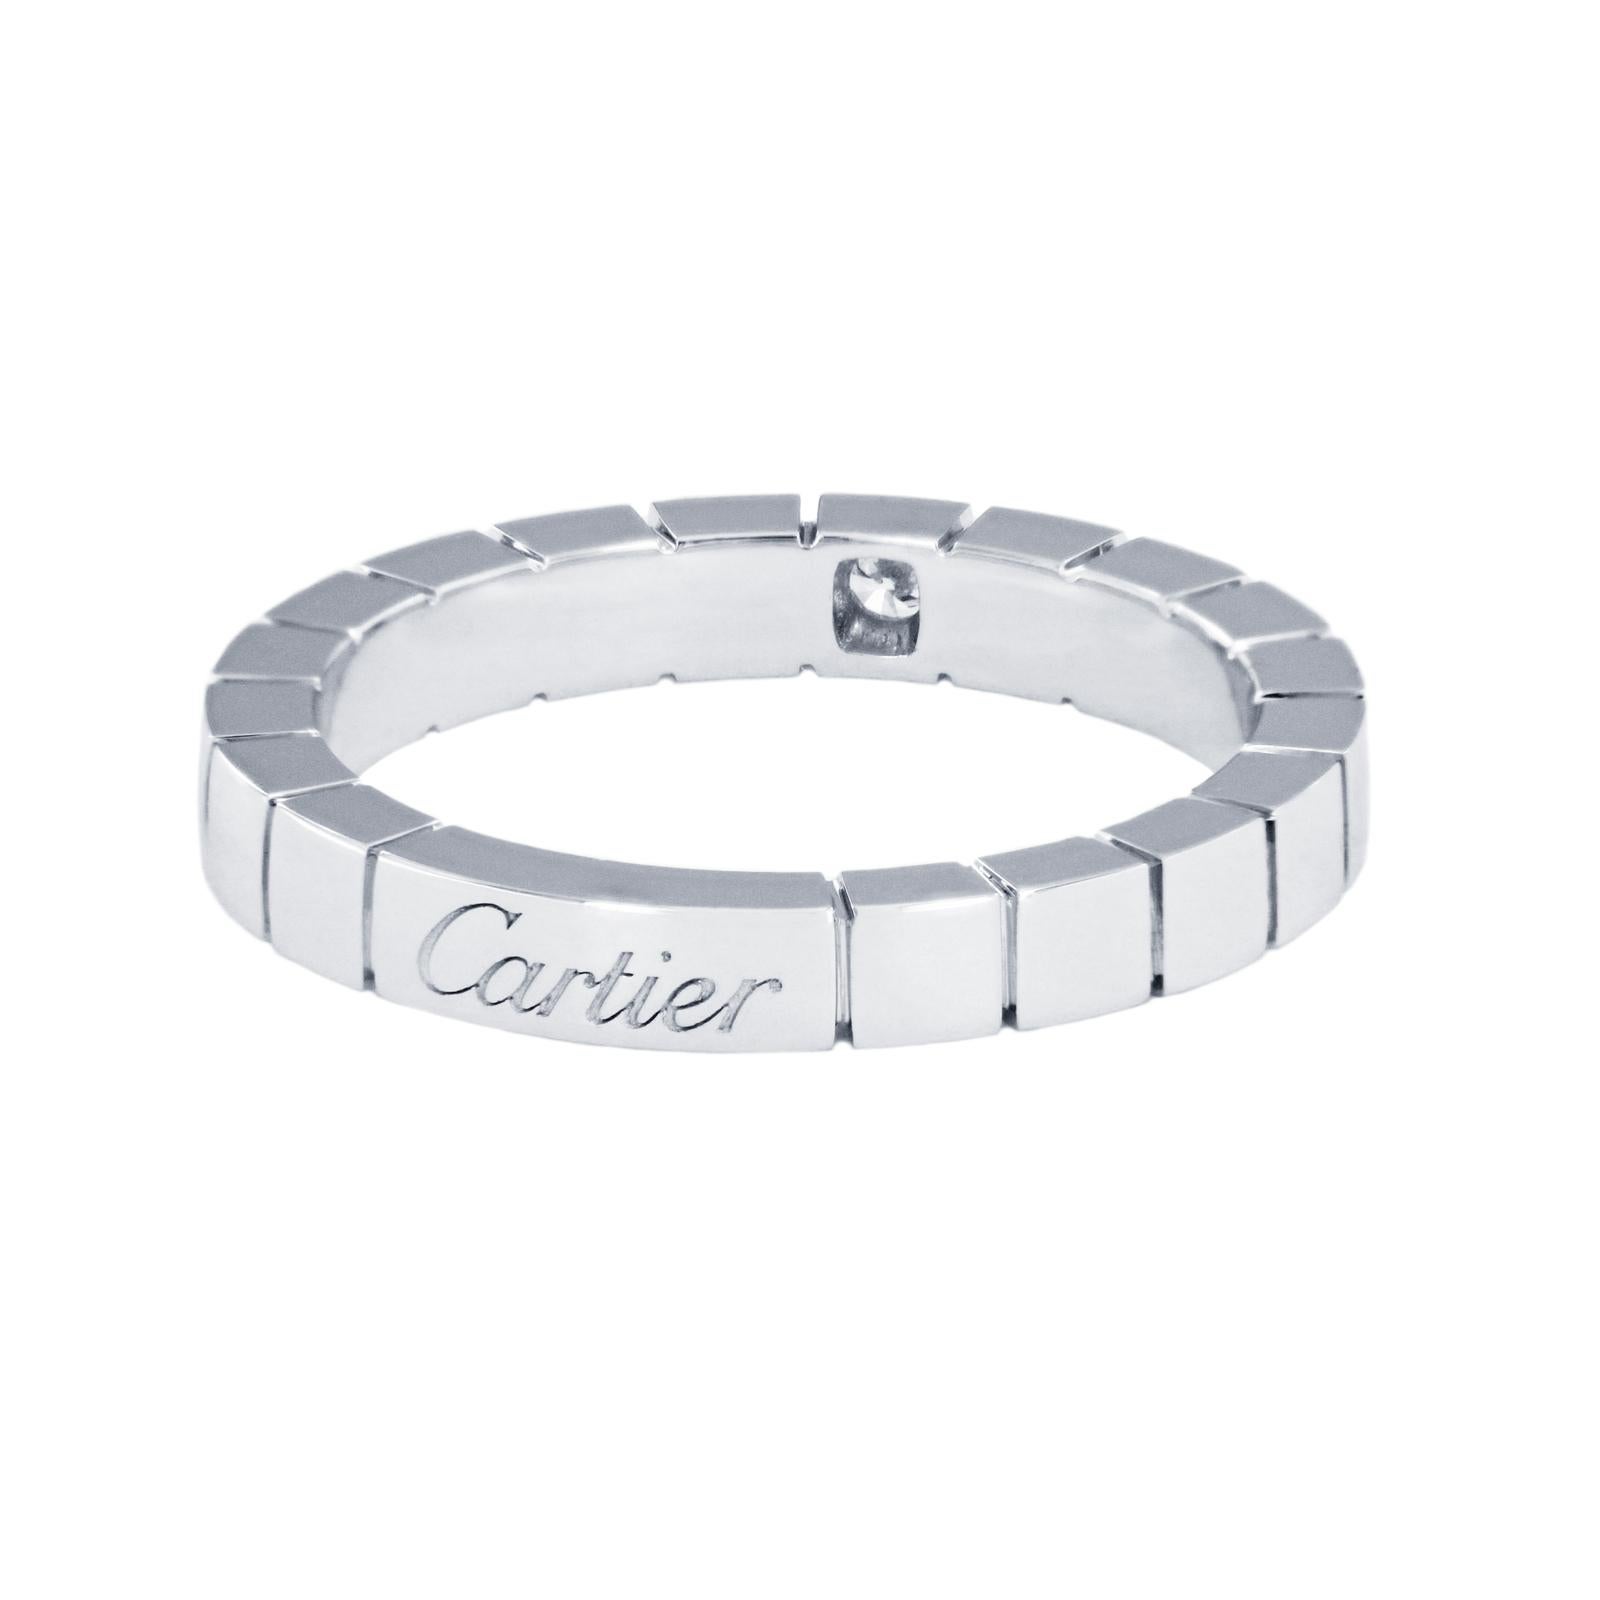 CARTIER 18K WHITE GOLD AND DIAMOND LANIERSES RING

-18k White Gold
-Ring size: 57/ 8
-Width: 3mm
-Diamonds: 1 Round Brilliant Cut, 0.04ct
-Carat Weight: 0.04ct

*Includes Cartier box
Retail Price: $2,900